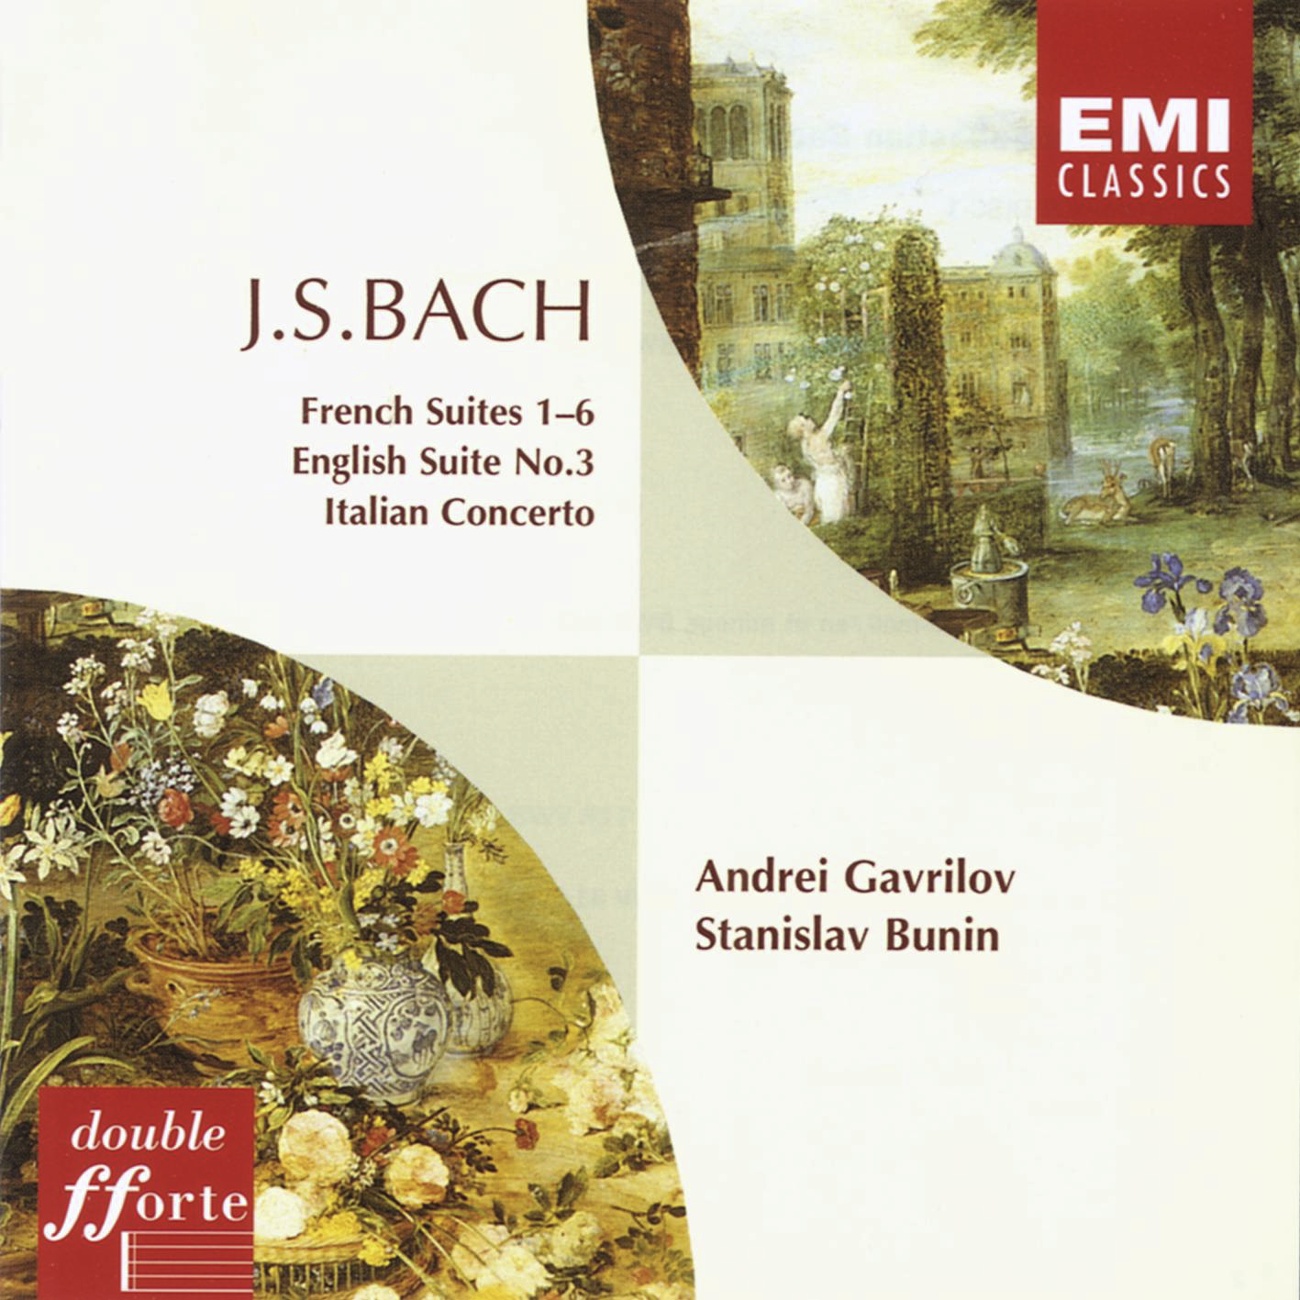 French Suite 6 In E, Bwv 817:III. Sarabande